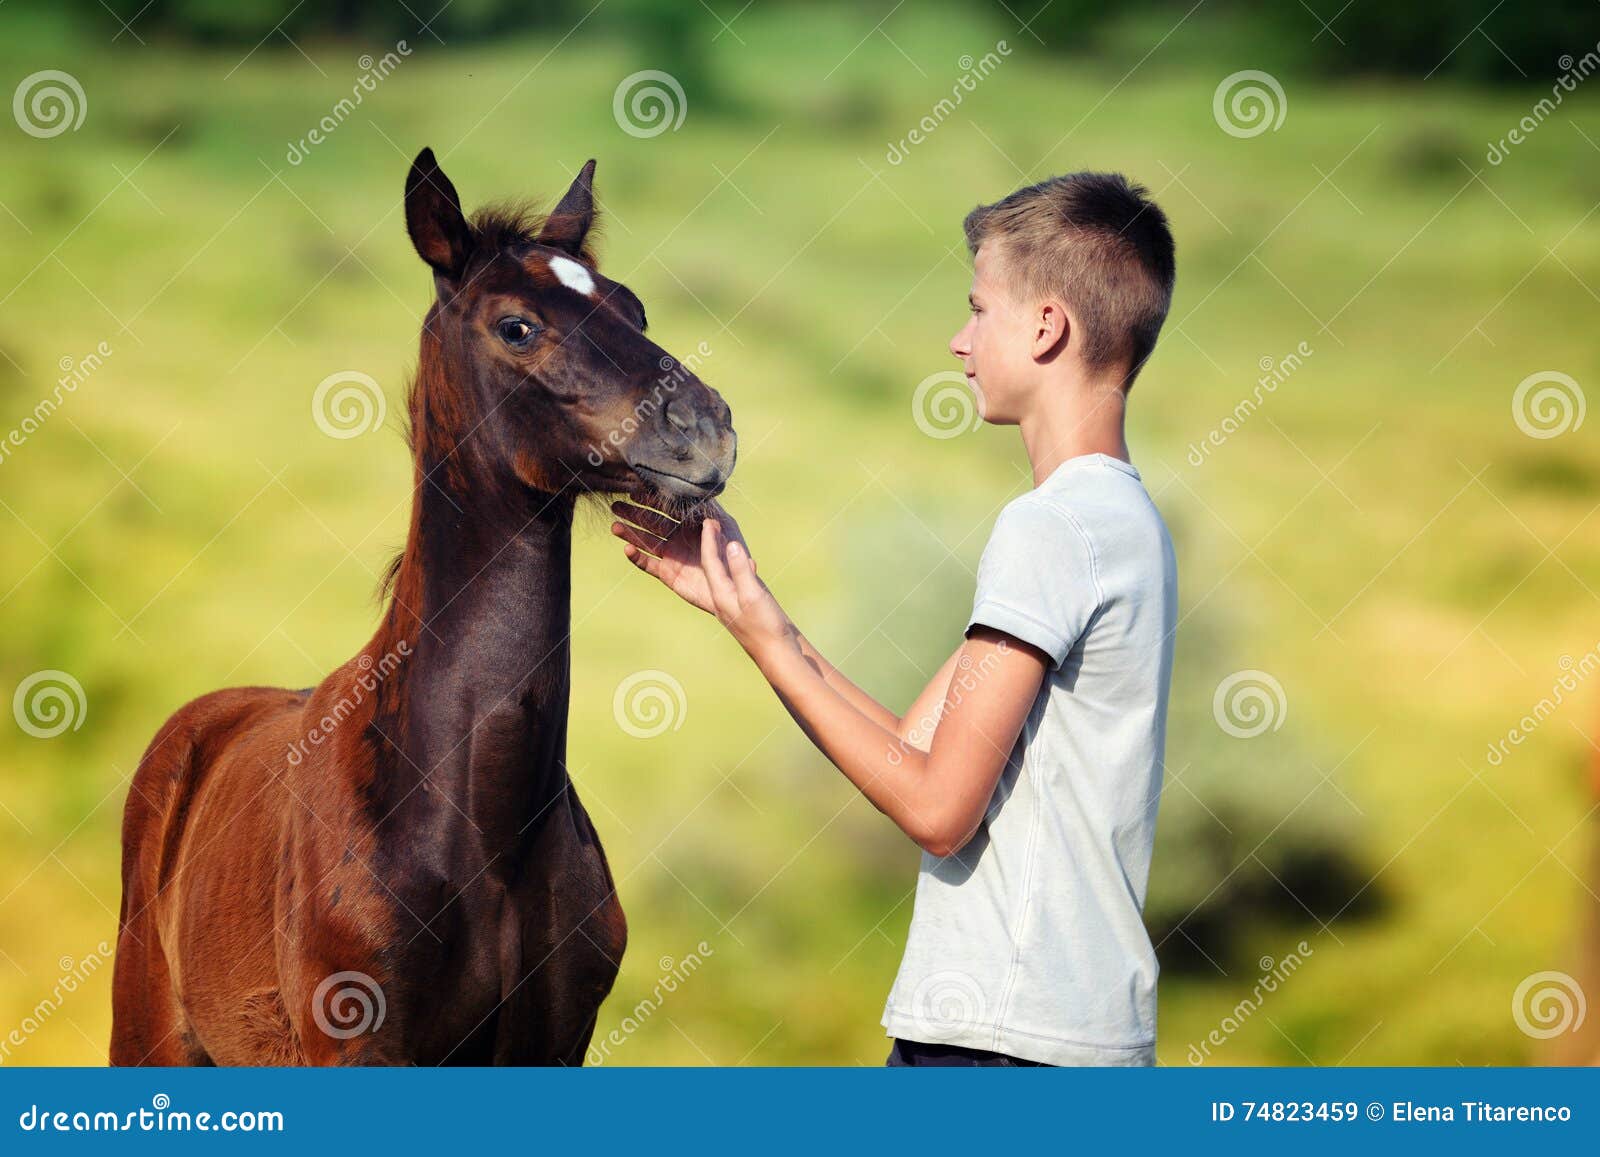 teen boy communicates with horse